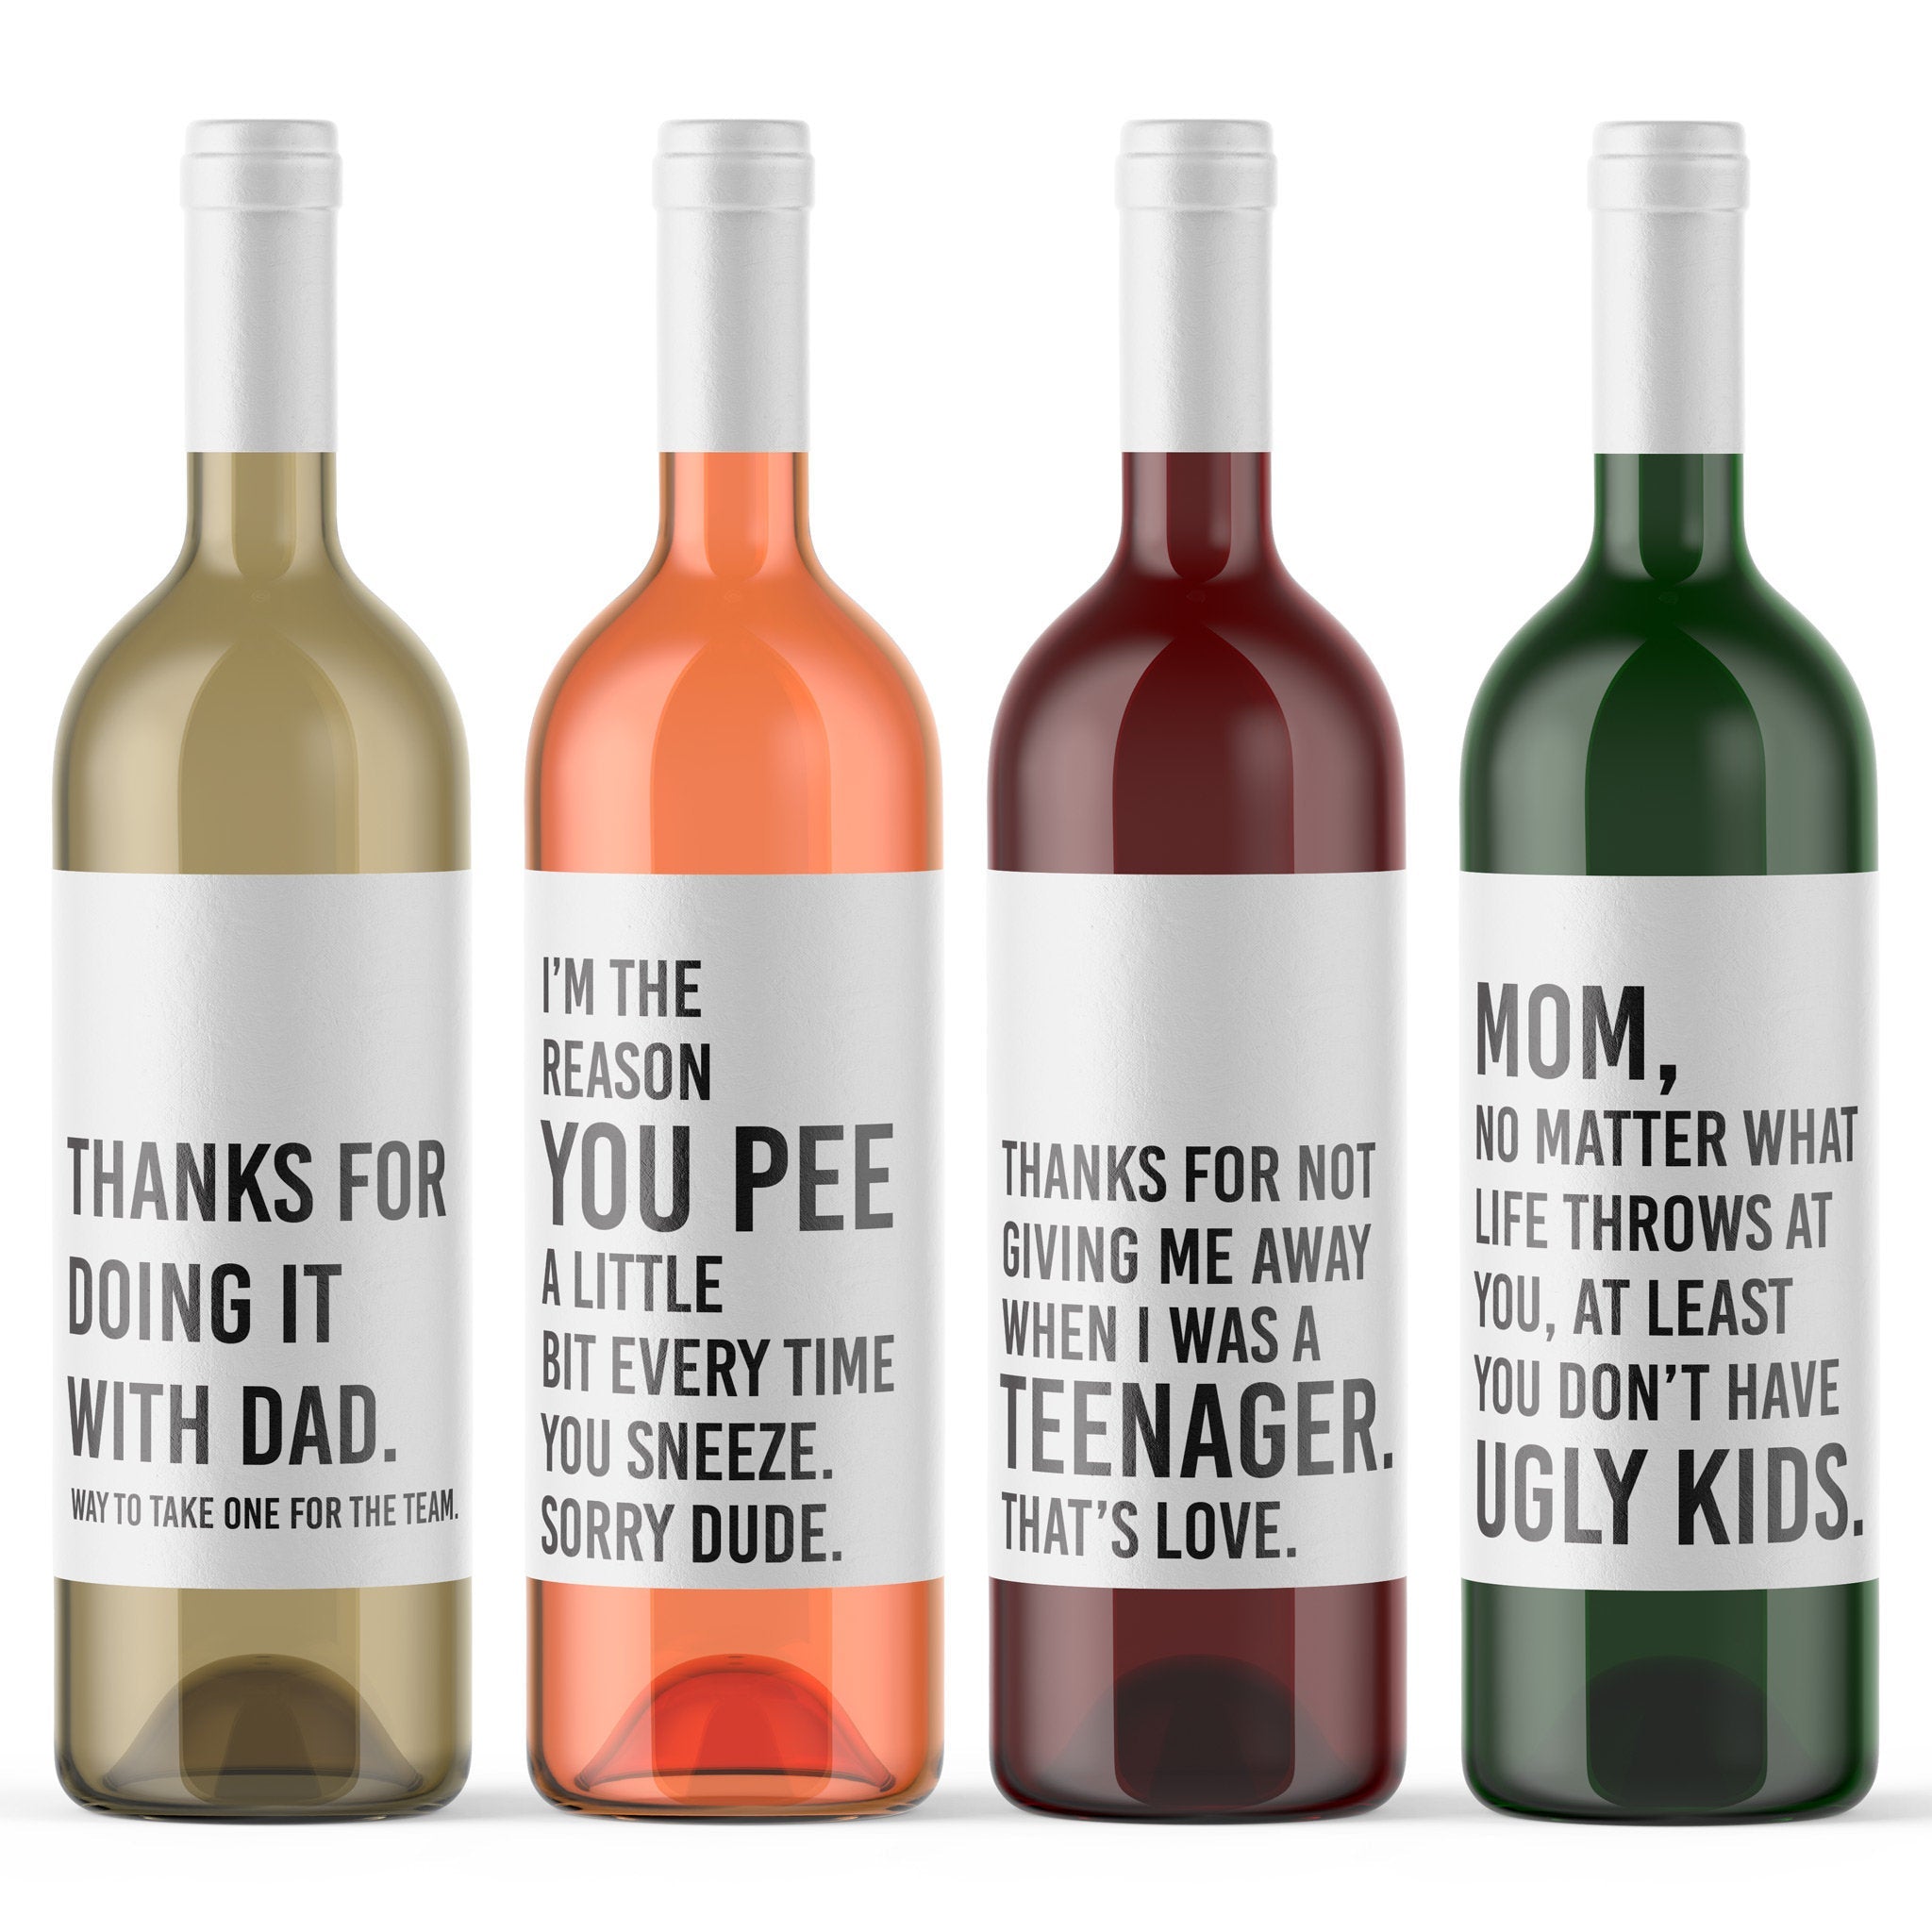 BigMouth Inc. Original Wine Bottle Glass – Holds an entire 750mL Bottle of  Wine, Reads 